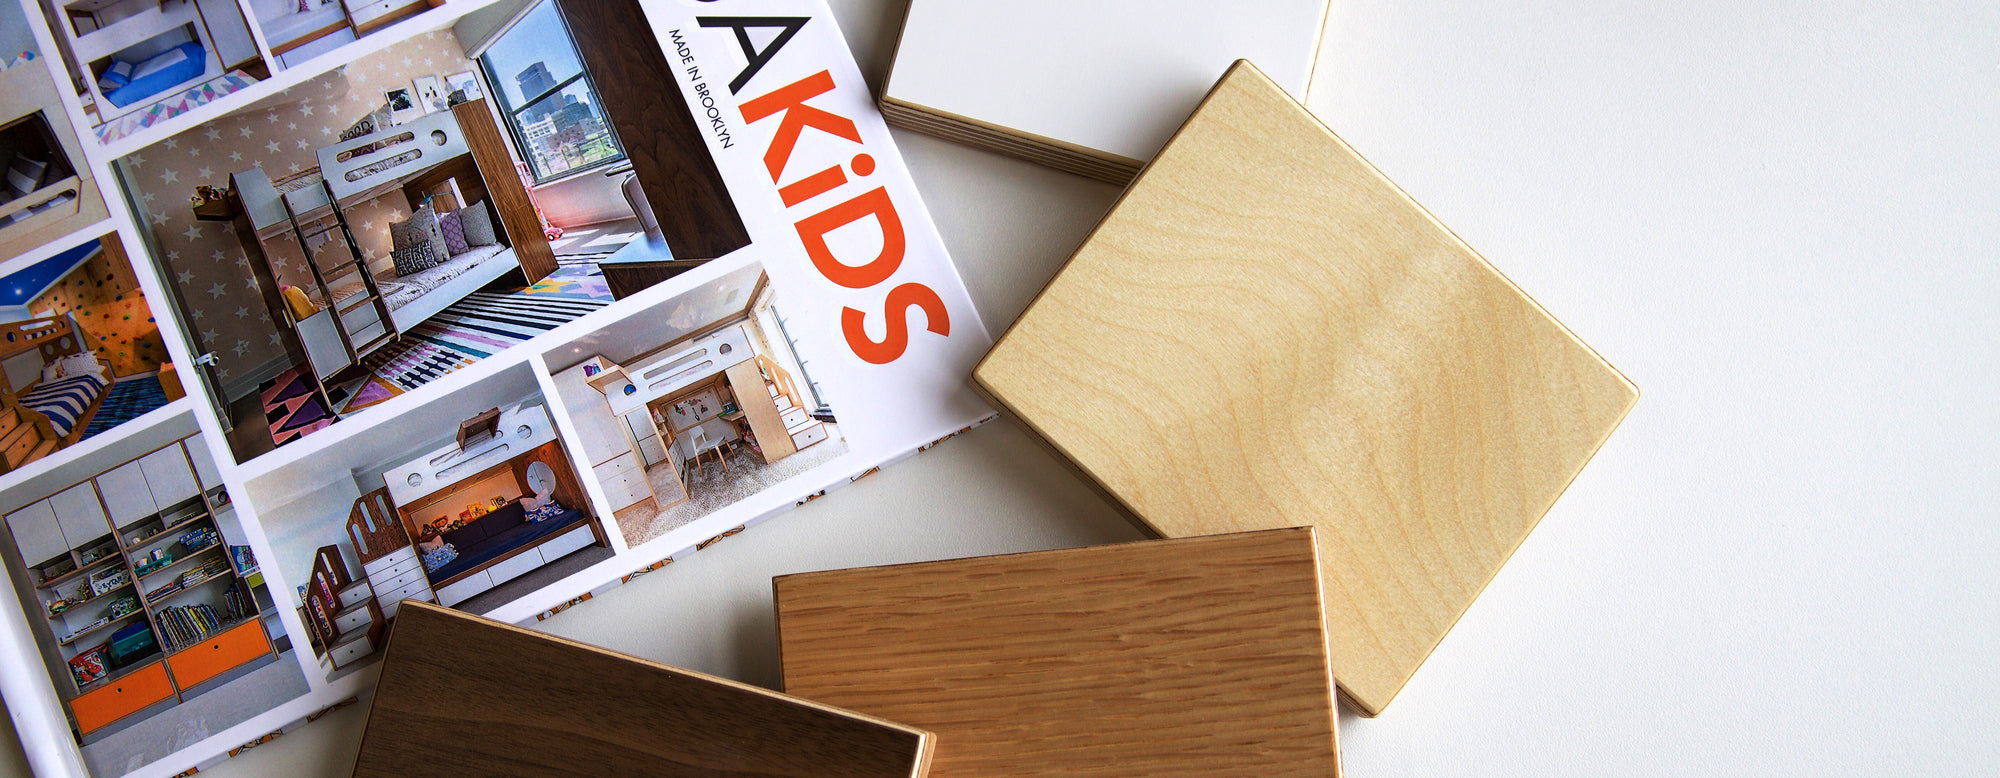 Open magazine featuring interior designs next to wood samples on a white surface.